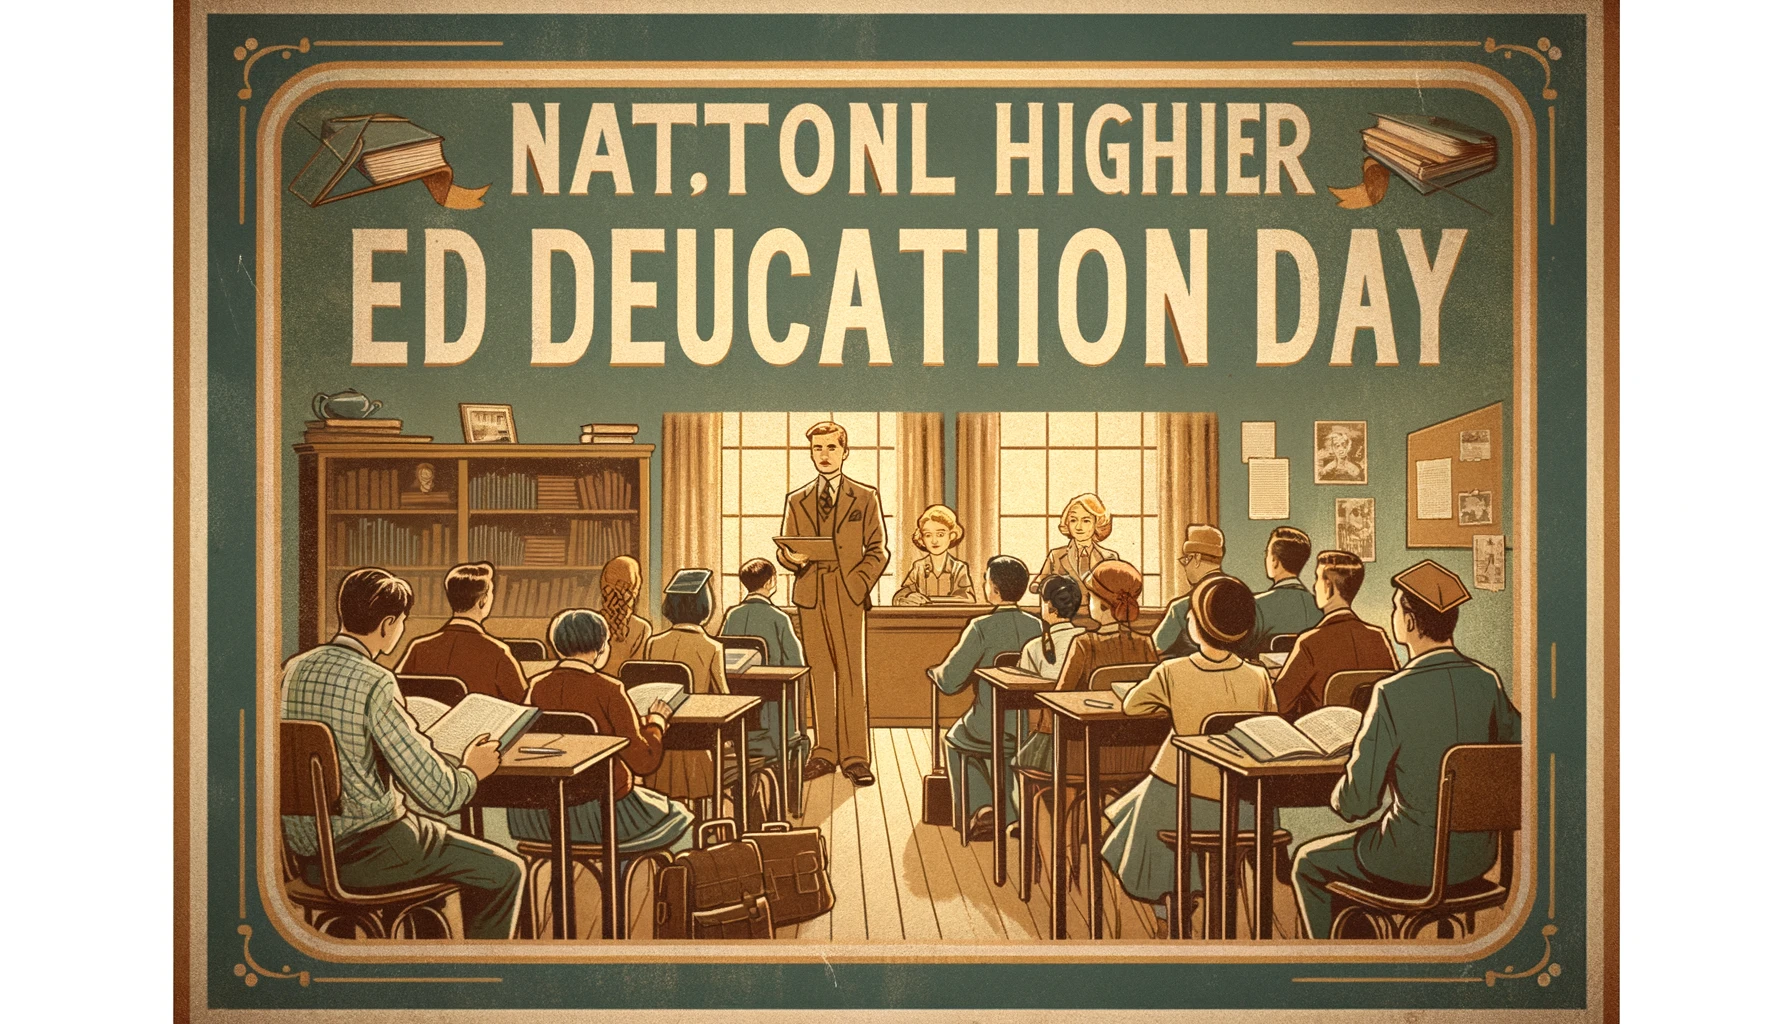 National Higher Education Day